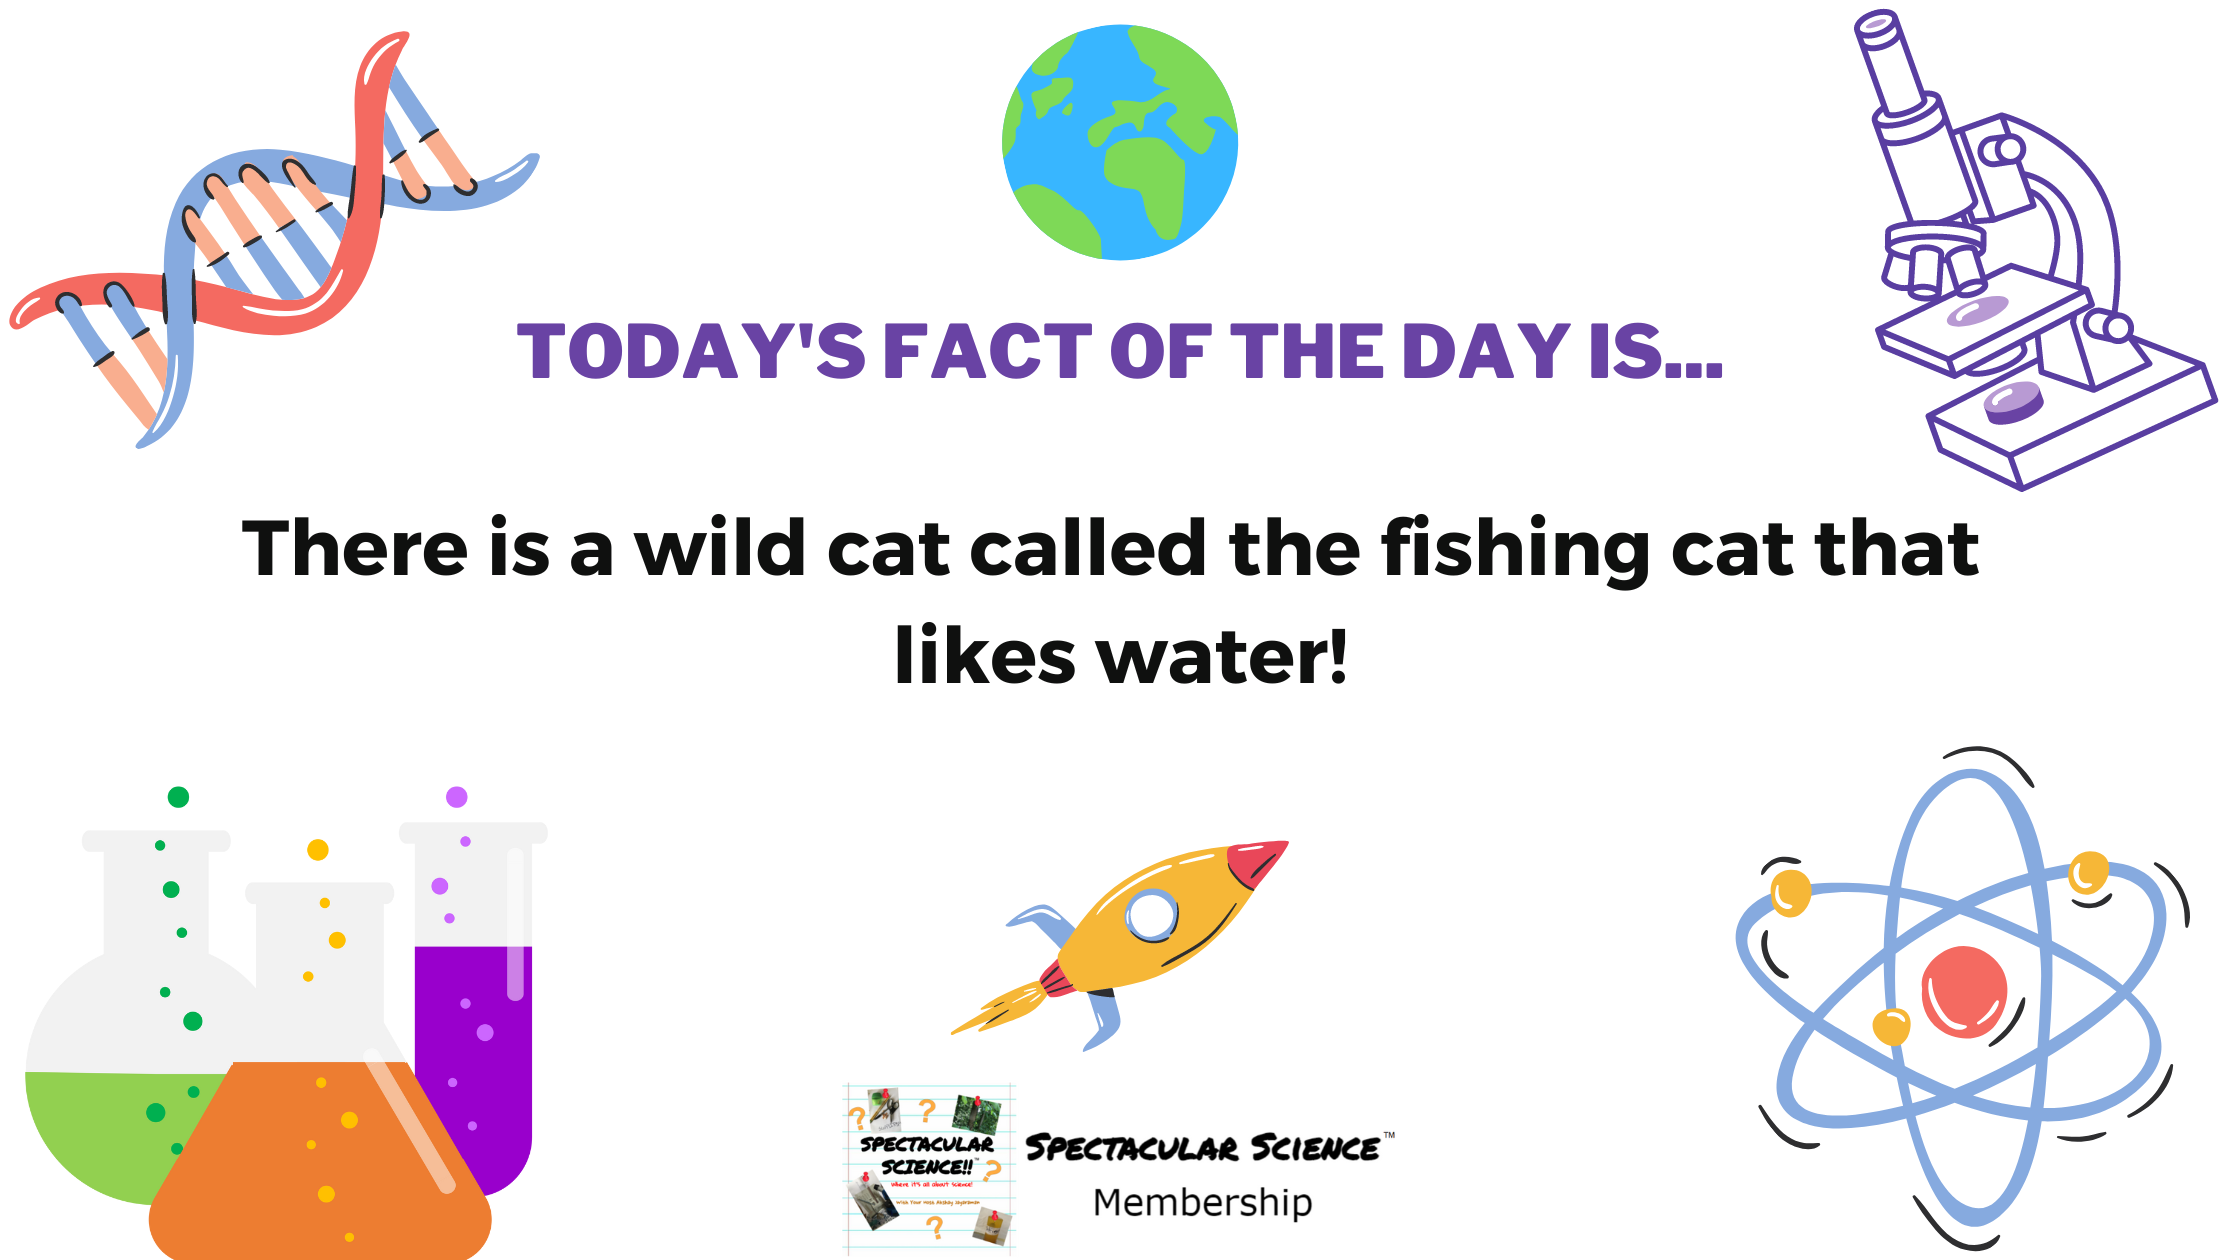 Fact of the Day Image September 24th